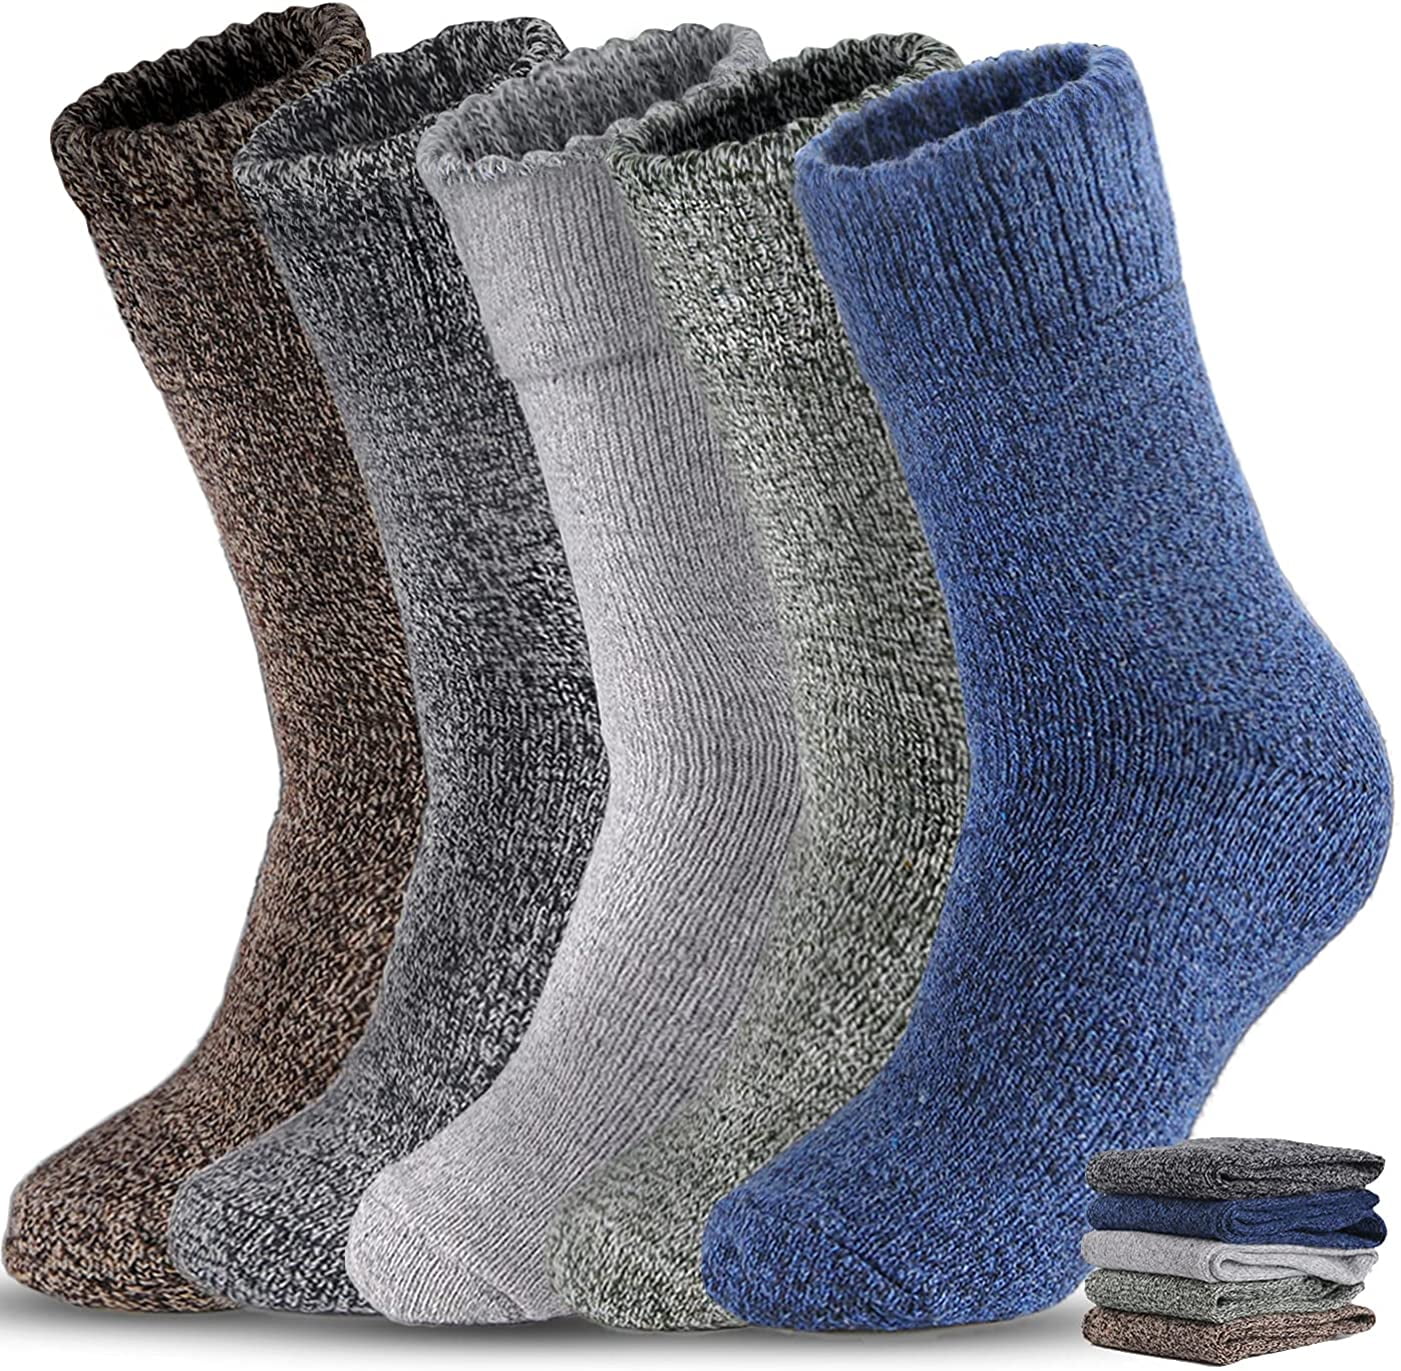 Men Winter Wool Socks Heavy Duty Thick Thermal Soft Dress Breathable 5 colors 